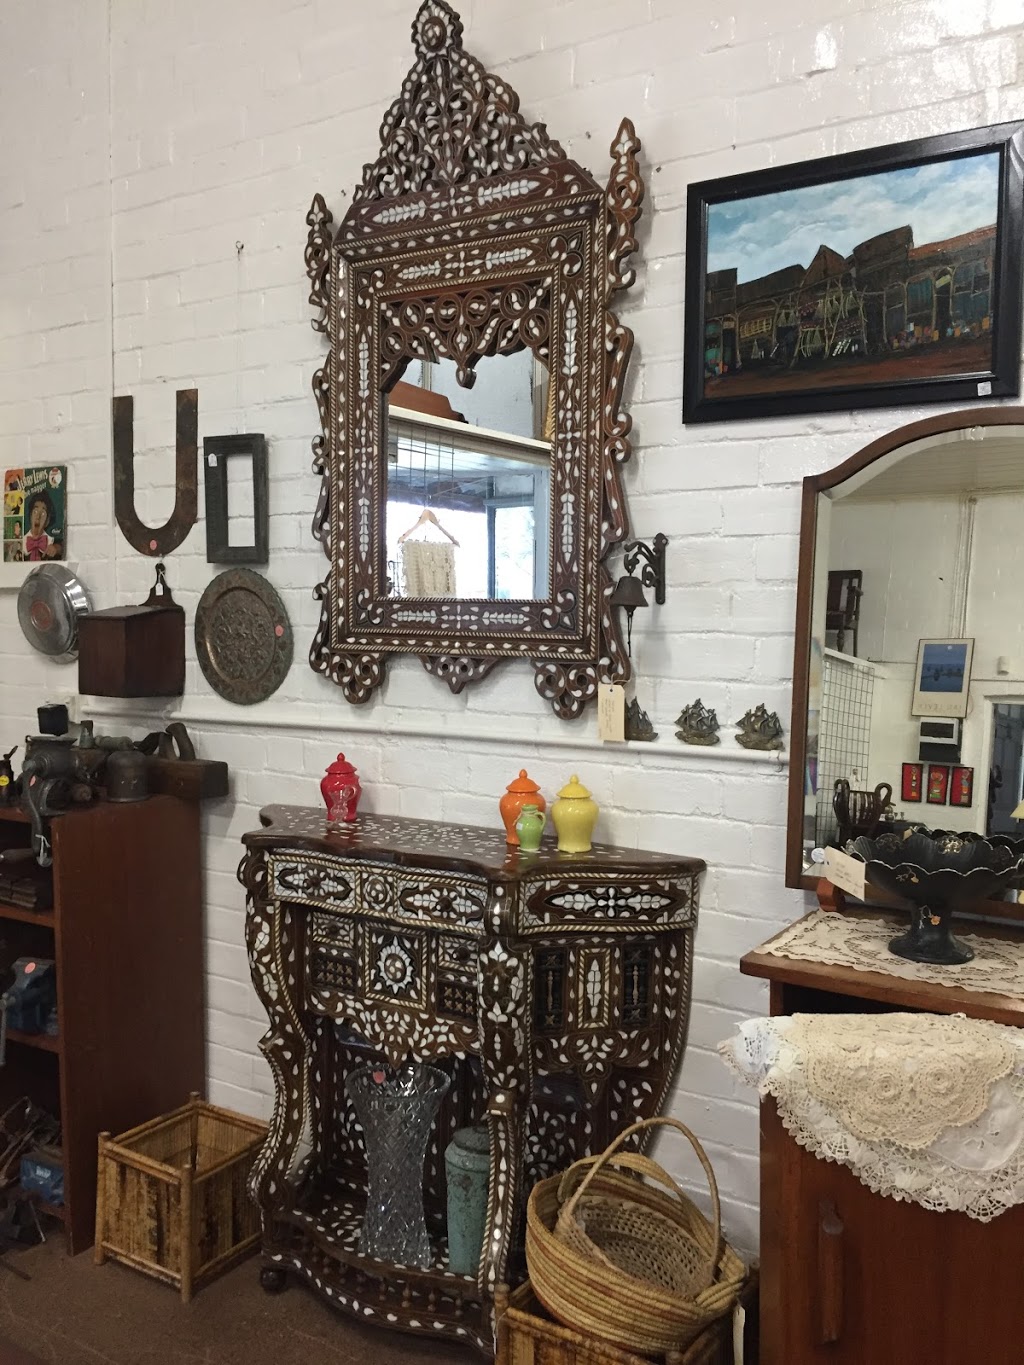 Time Warp Collectables | jewelry store | 153a Havannah St, Bathurst NSW 2795, Australia | 0417575628 OR +61 417 575 628